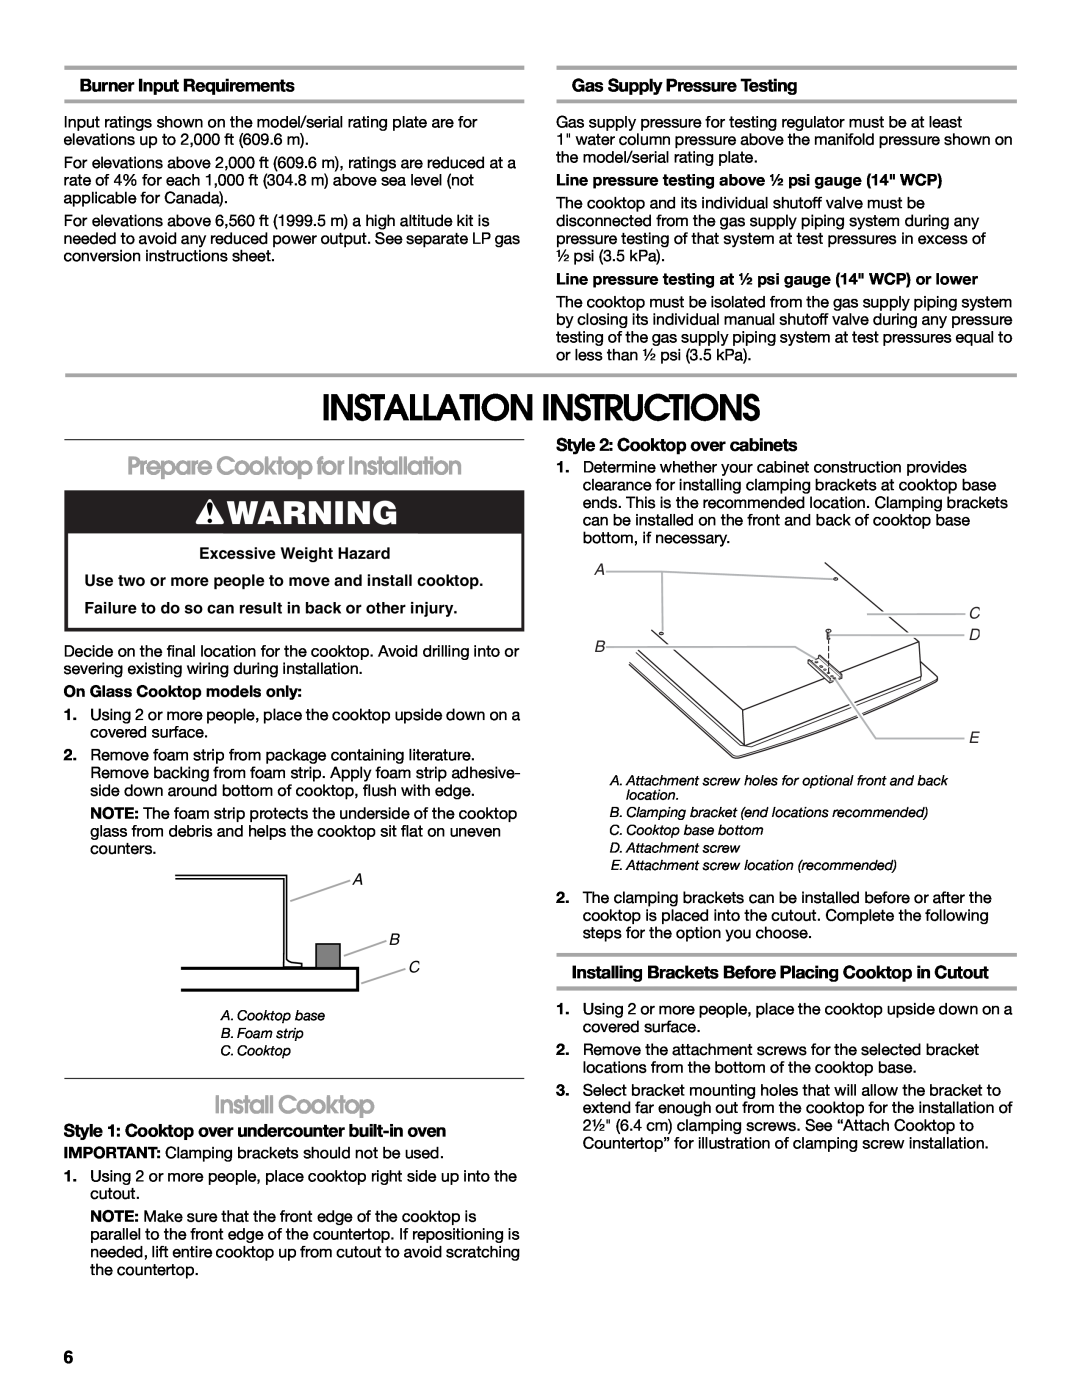 Whirlpool Gas Built-In Cooktop Installation Instructions, Prepare Cooktop for Installation, Install Cooktop, A B C 